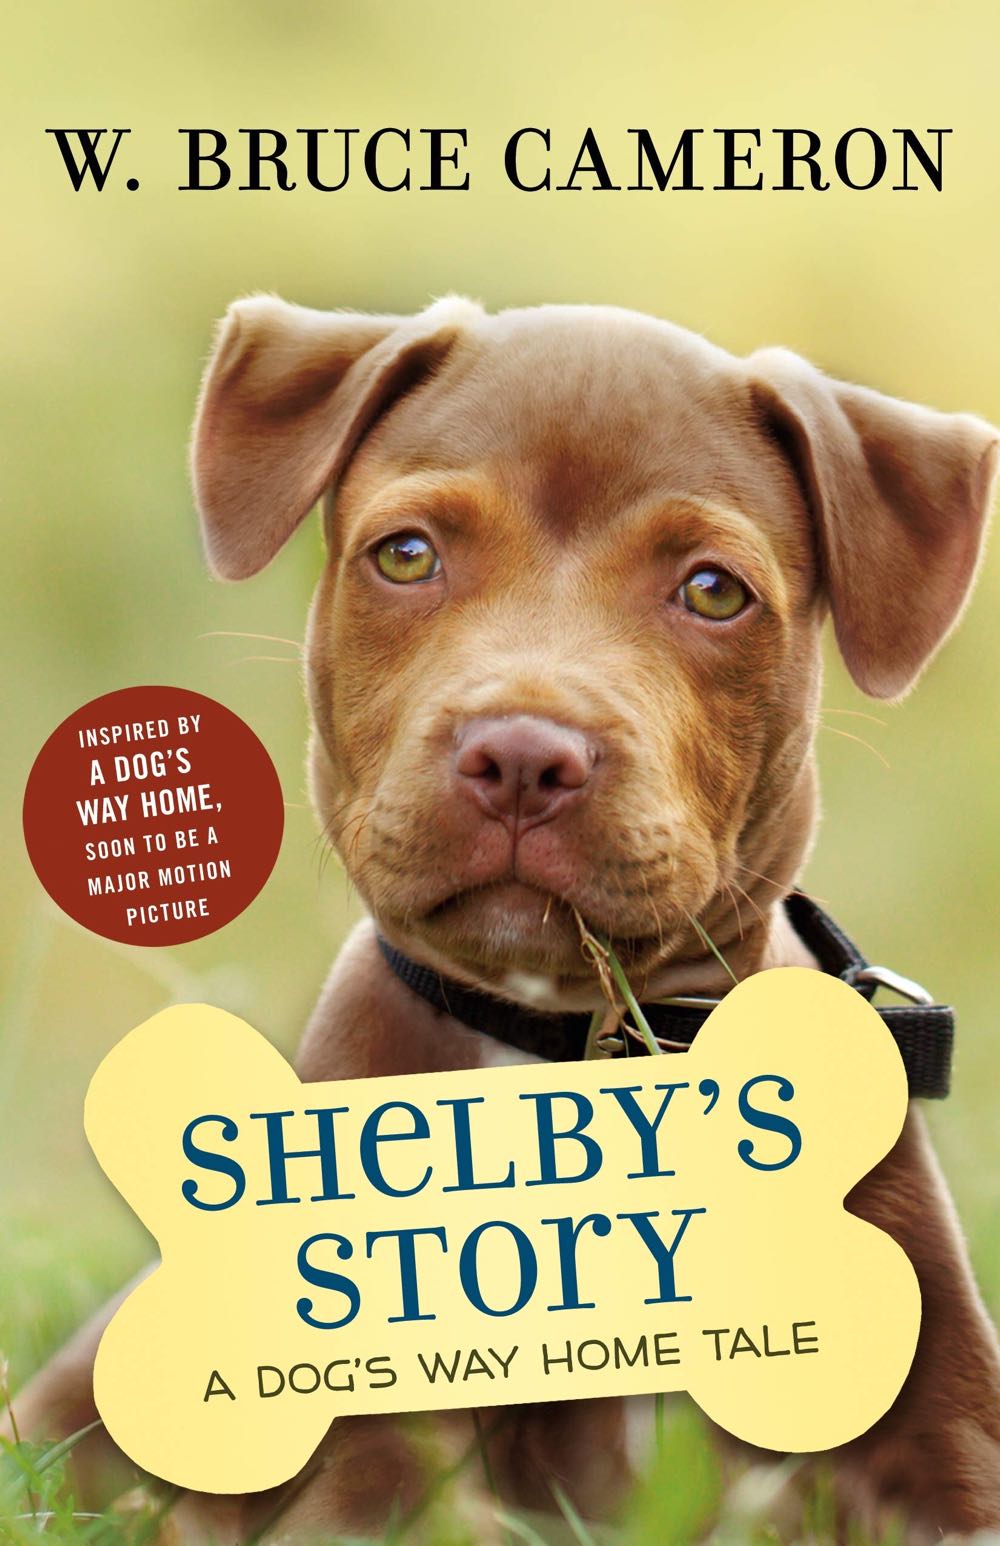 A Dog’s Way Home Tale: Shelby’s Story - W. Bruce Cameron (Scholastic - Paperback) book collectible [Barcode 9781338531787] - Main Image 1